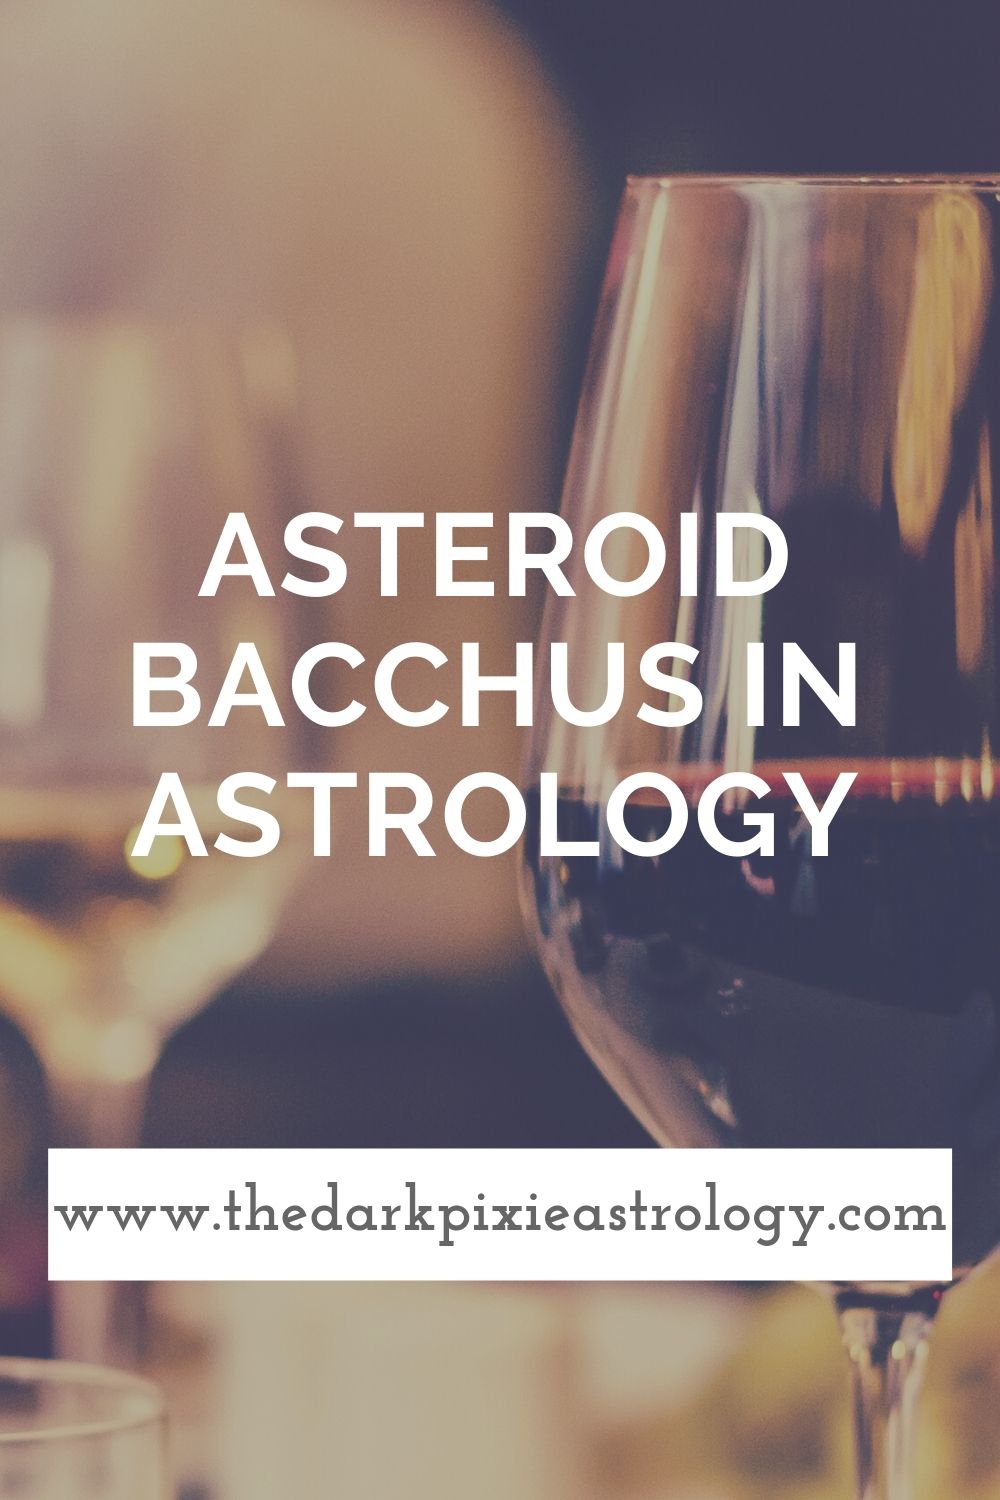 Asteroid Bacchus in Astrology - The Dark Pixie Astrology